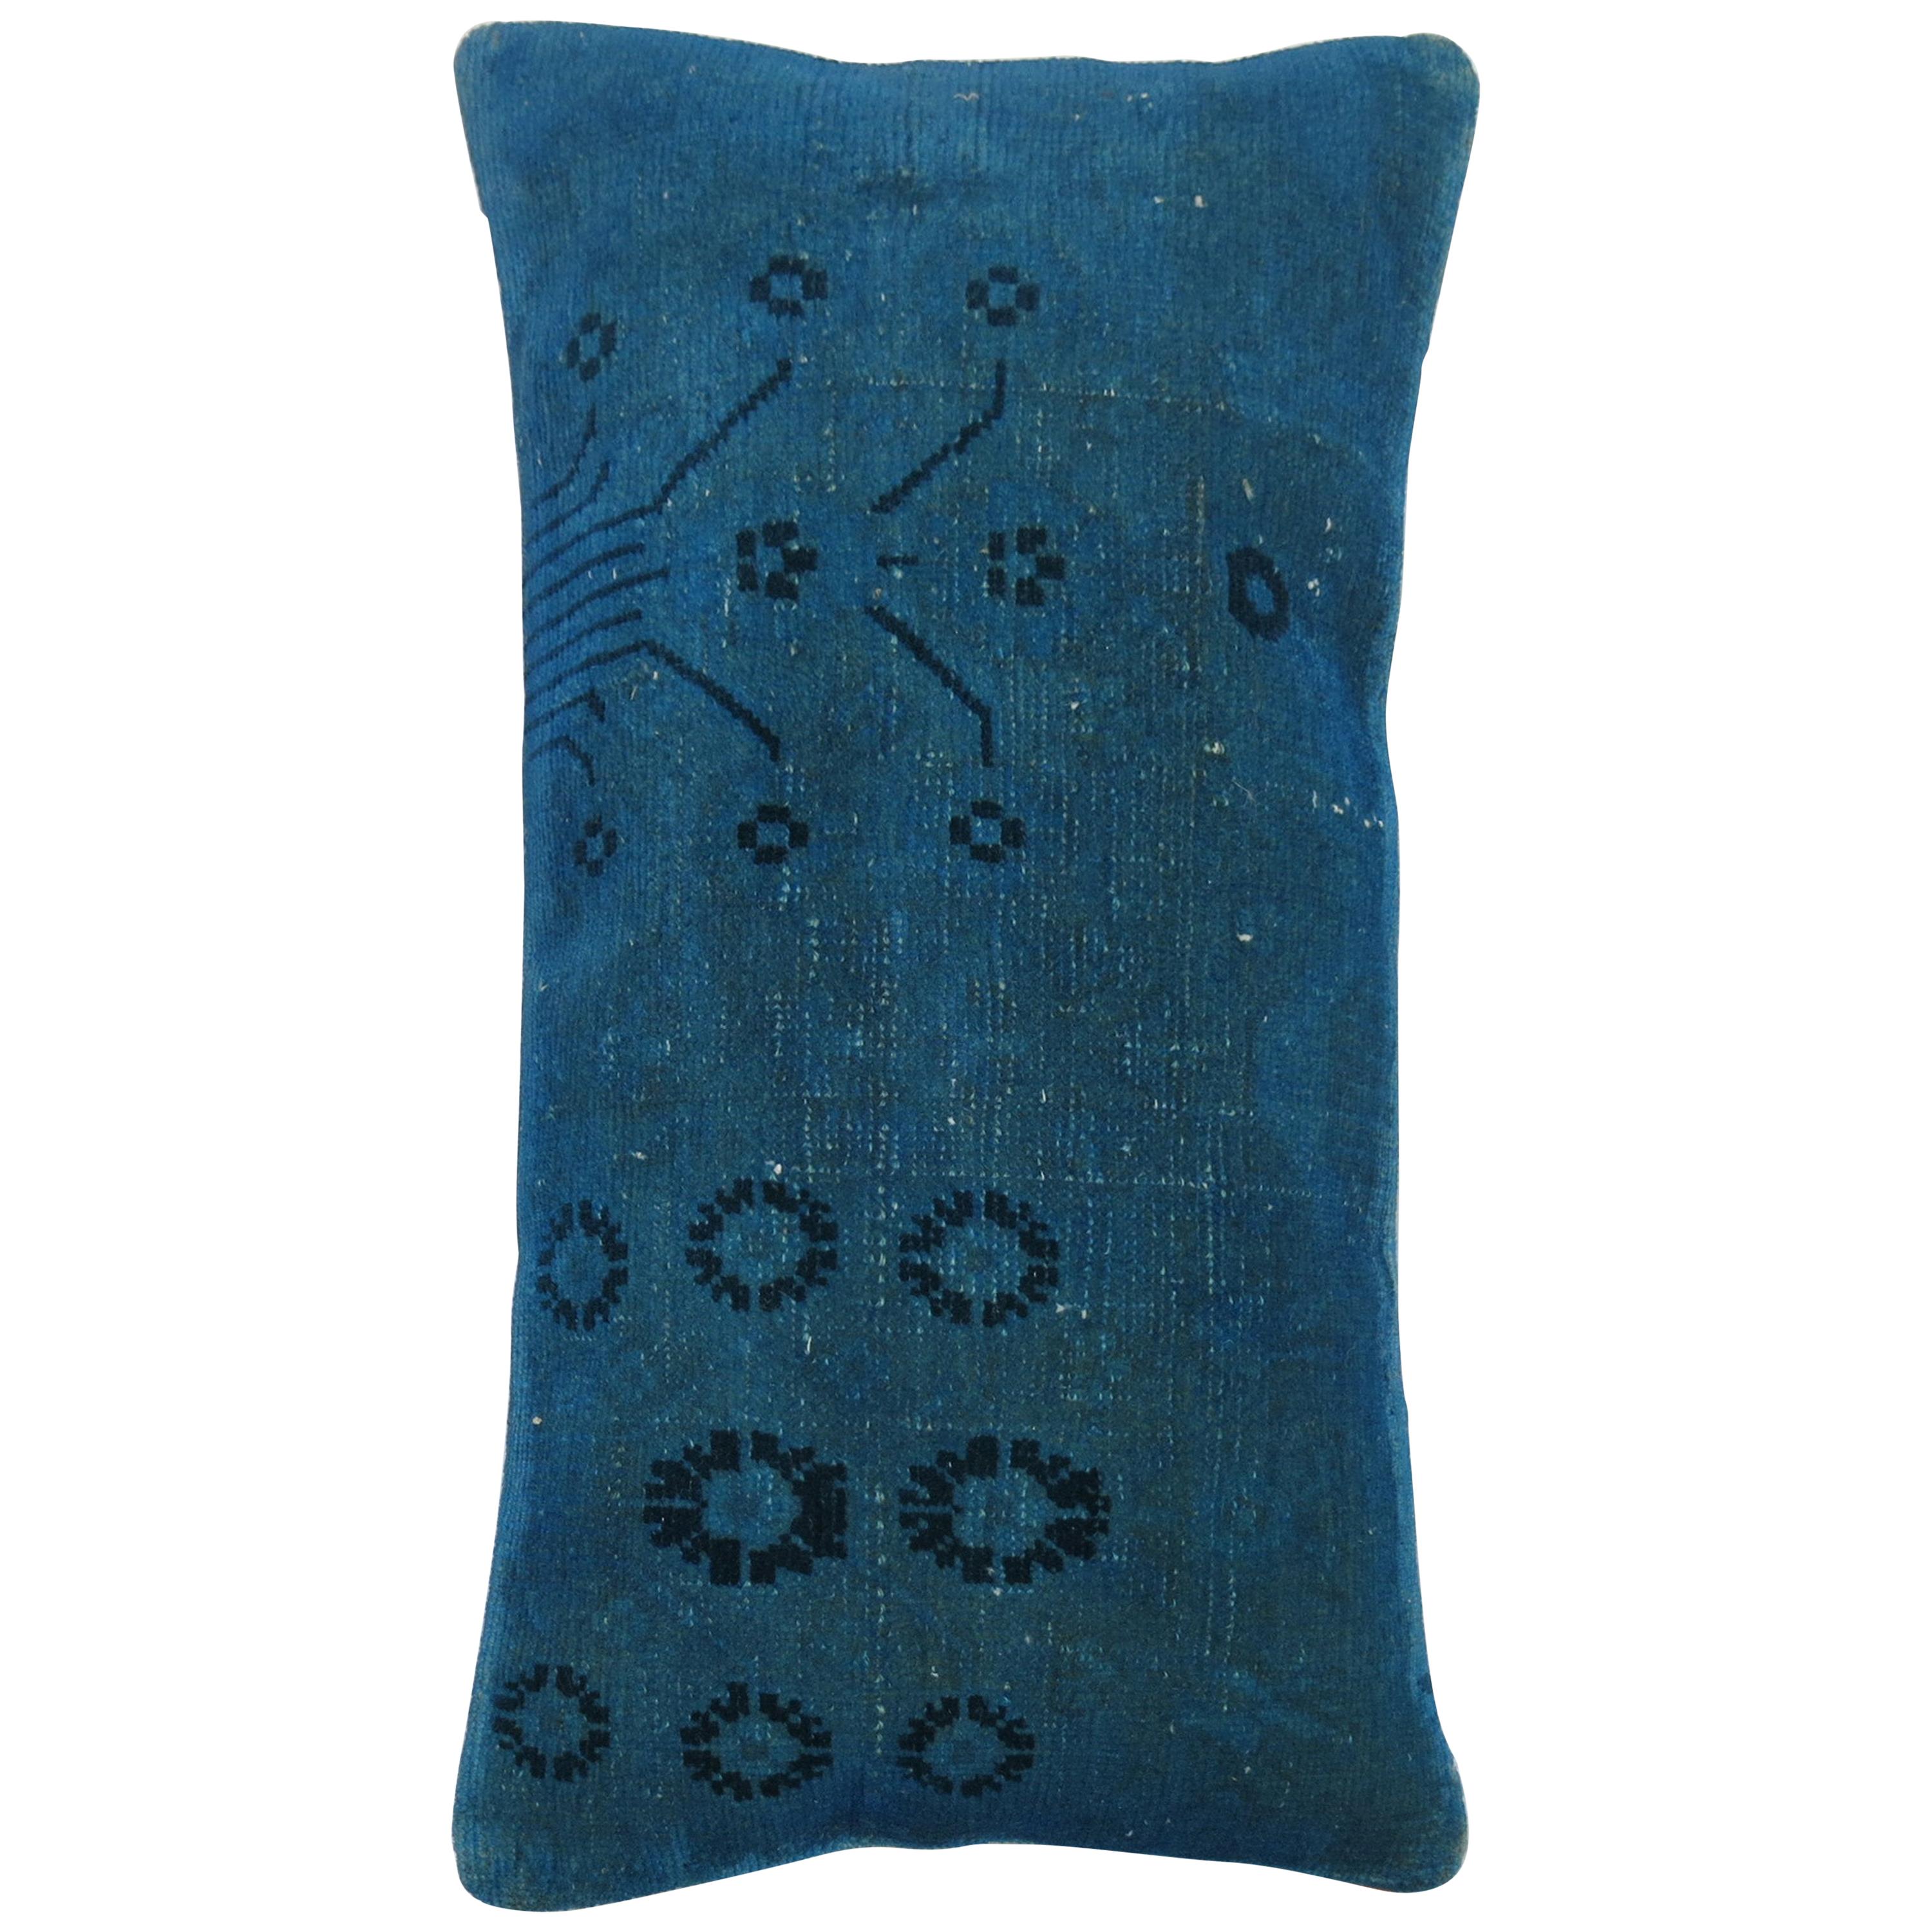 Blue Over-Dyed Turkish Pillow